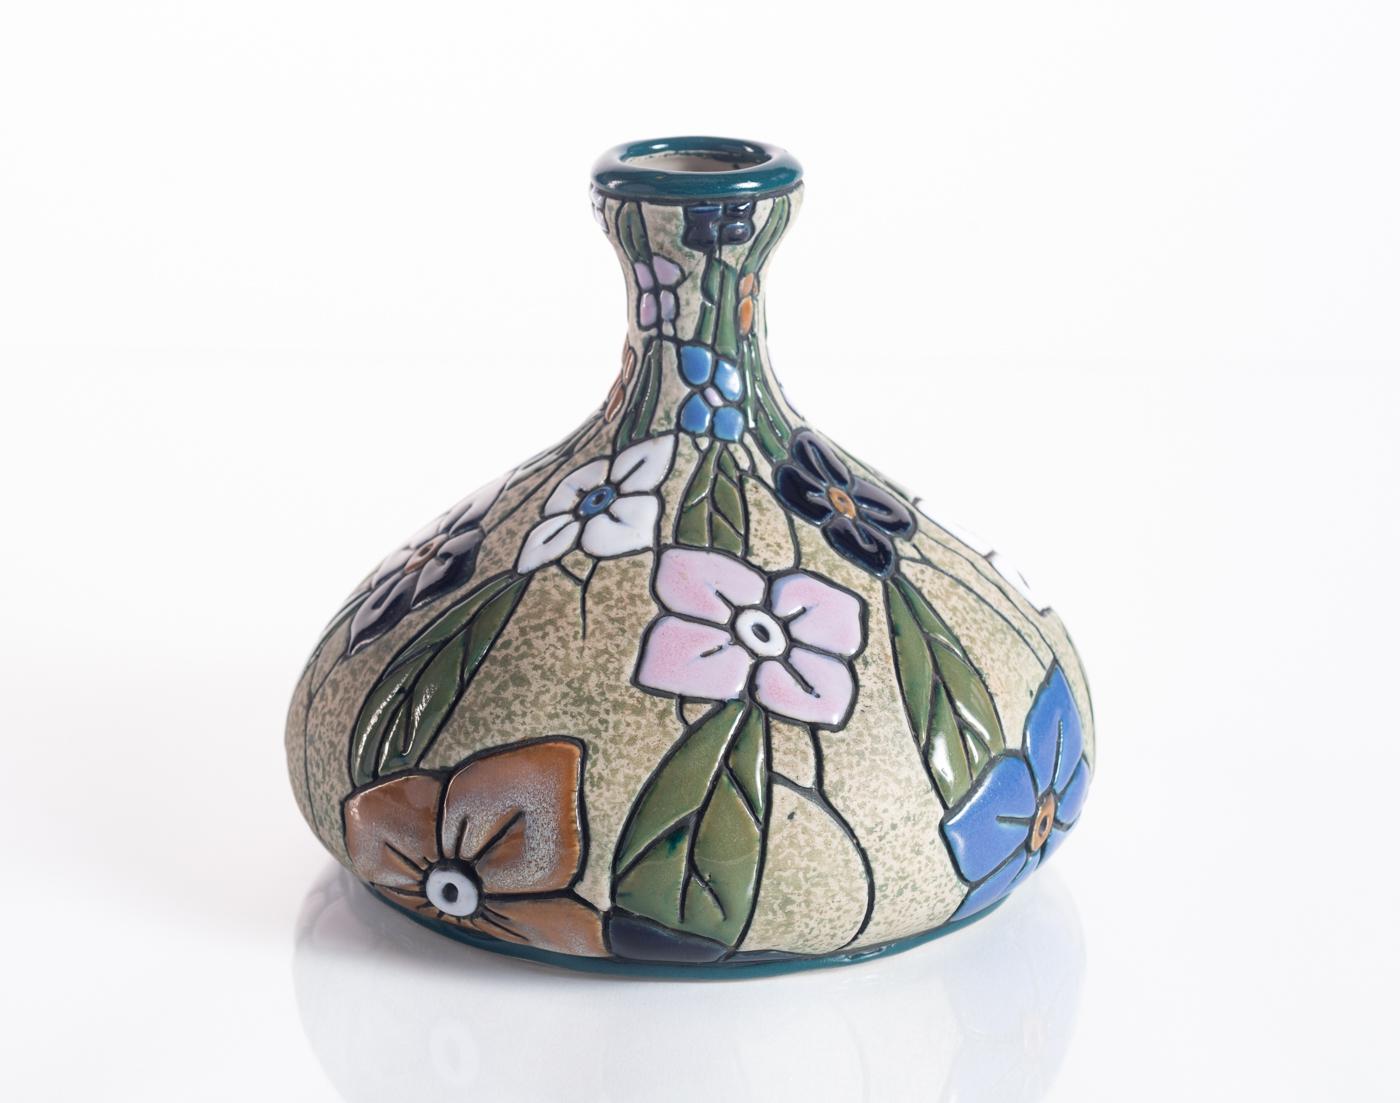 A colorful ceramic vase with hand-painted flowers in bright cloisonné enamels. Stamped Amphora in the base, and numbered.

Riessner, Stellmacher and Kessel (RStK), later known as Amphora, began producing luxury ceramic objects in Turn-Teplitz,